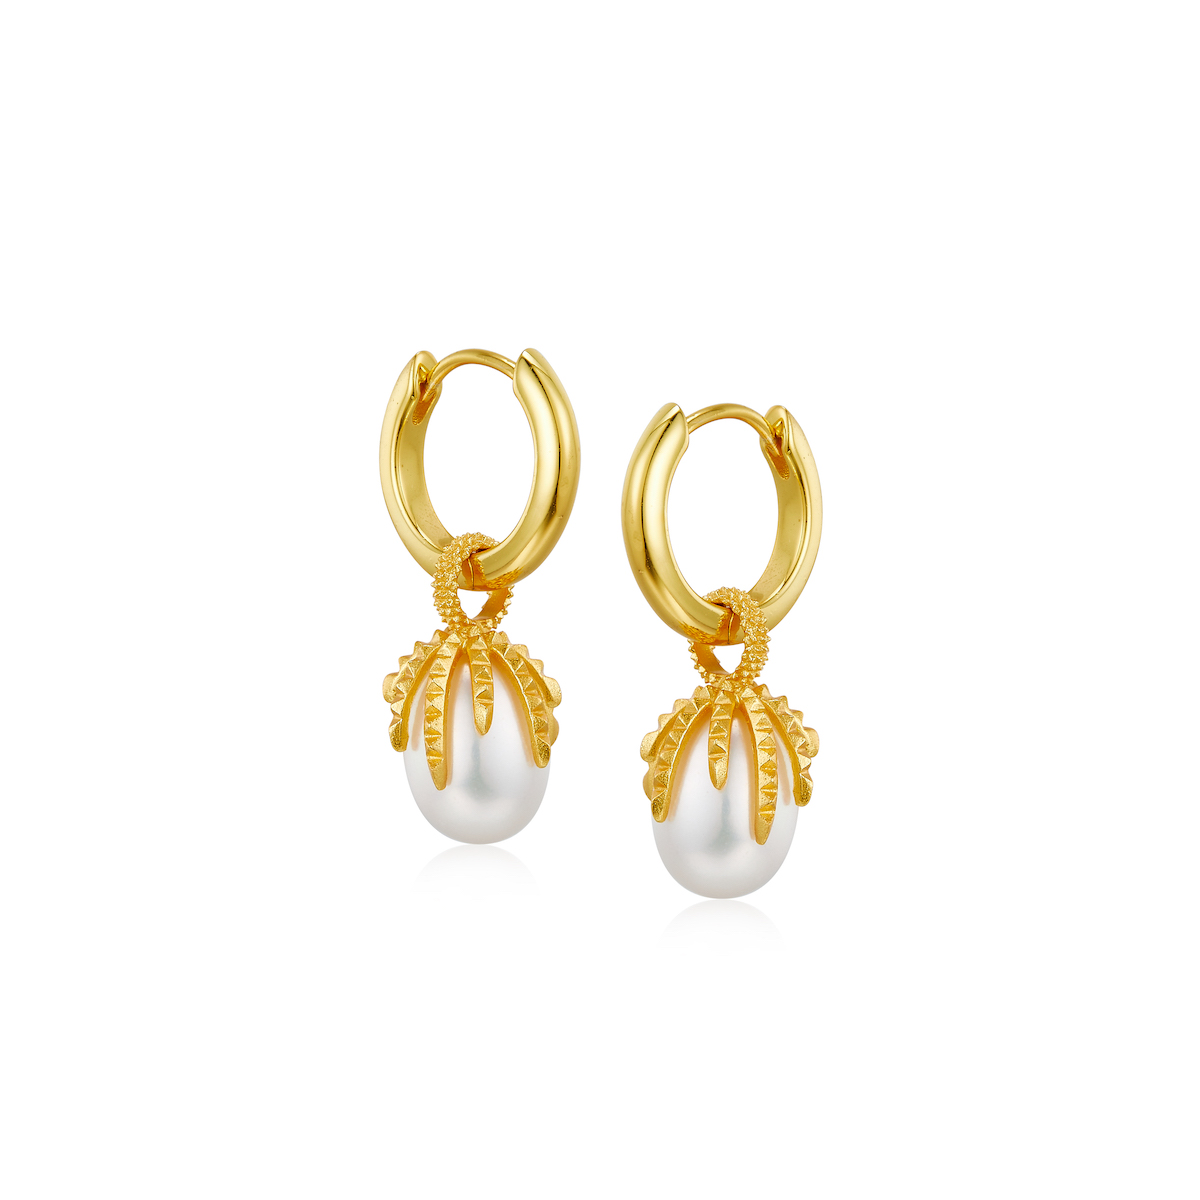 Earrings Fashionable Exquisite and Elegant Earrings